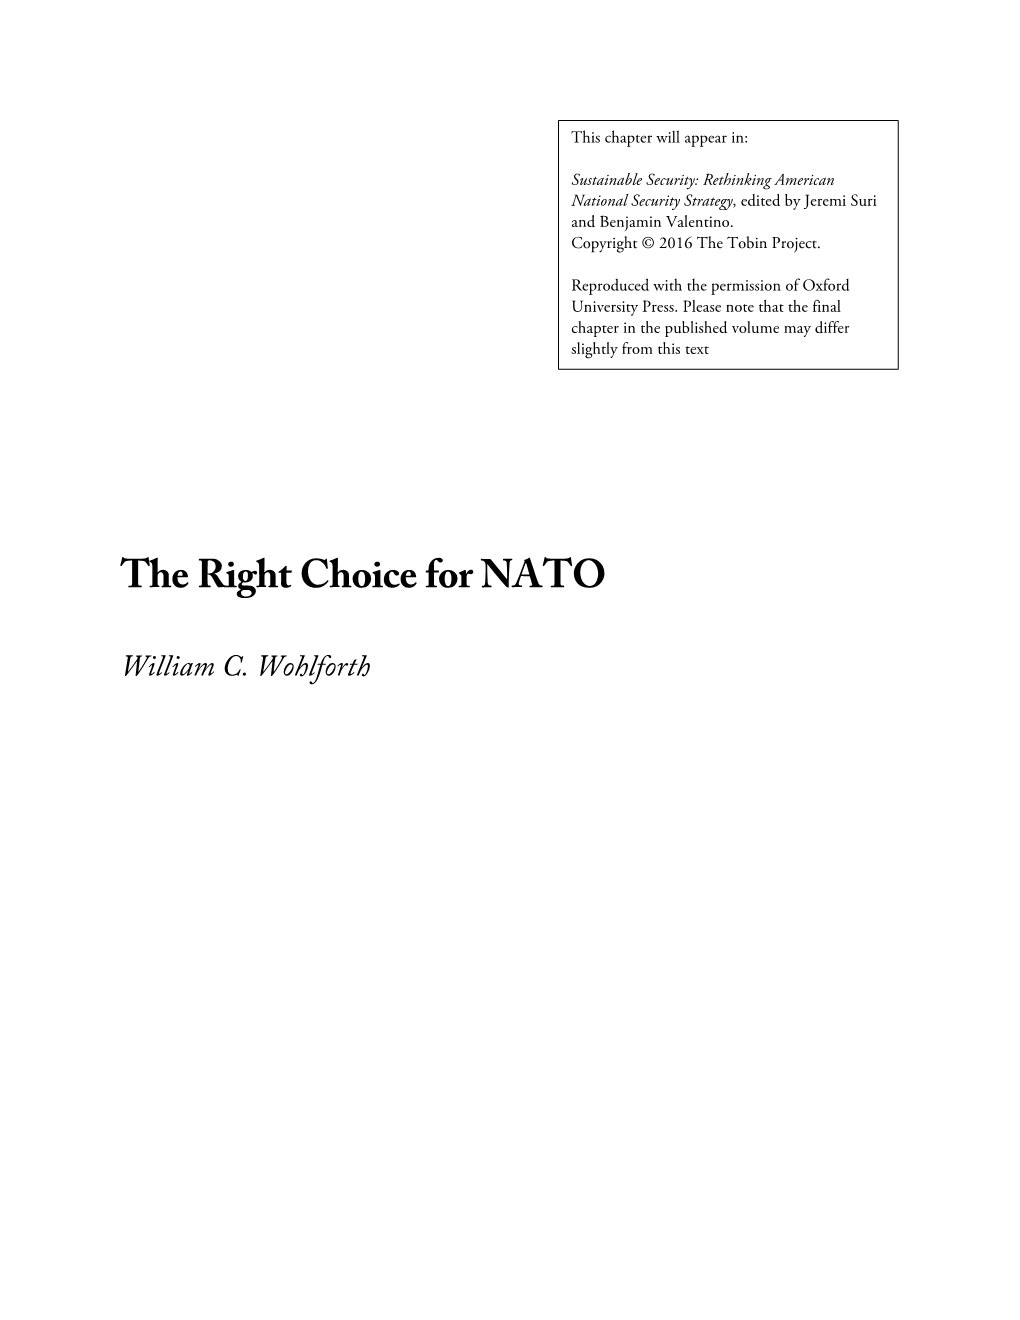 The Right Choice for NATO